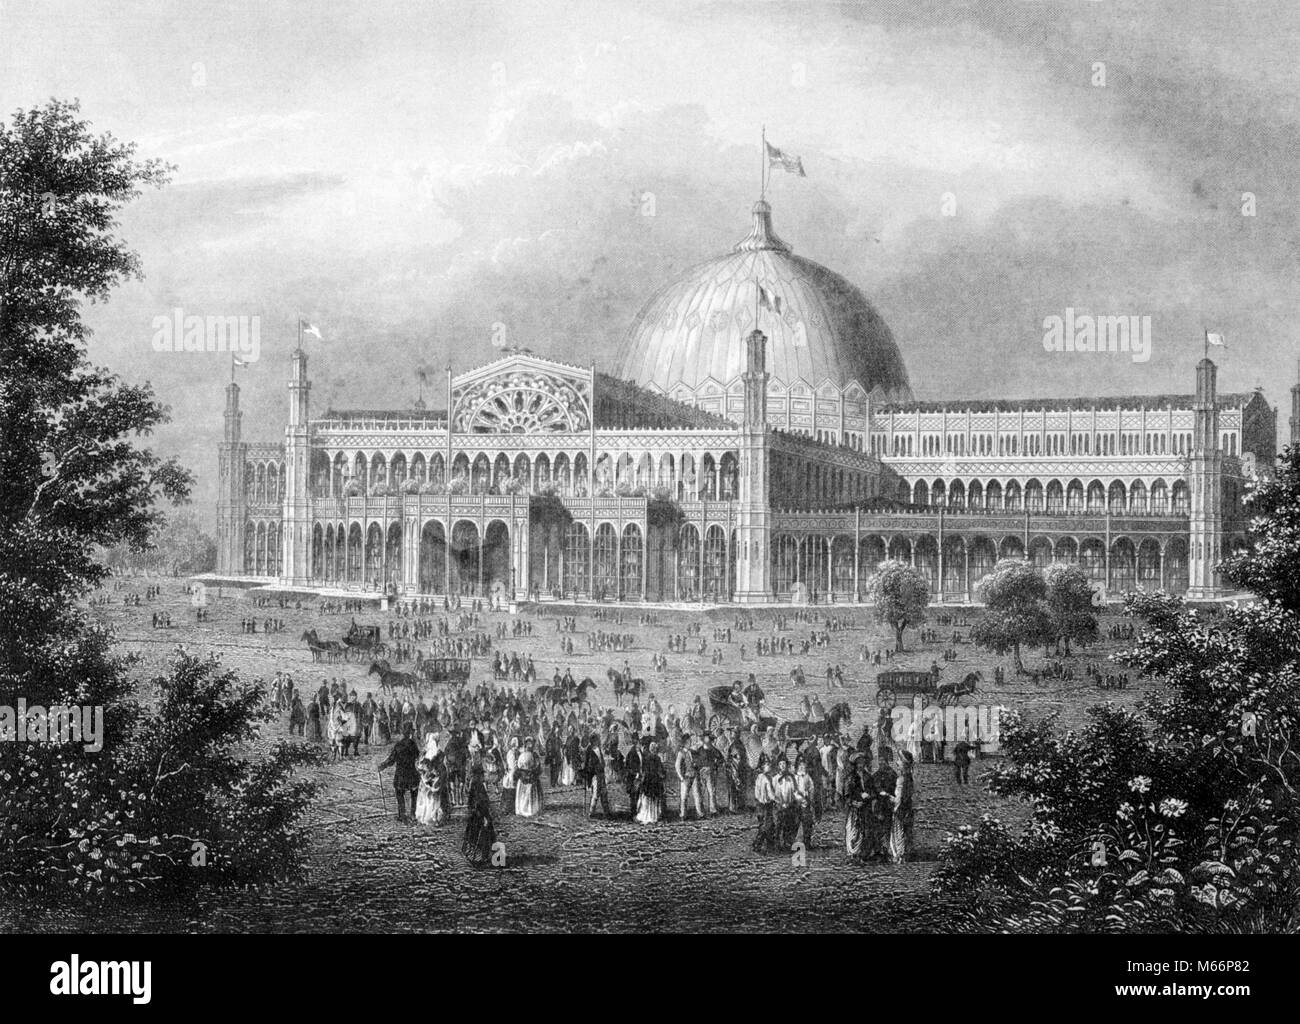 1800s 1850s 1853 NEW YORK CITY WORLD'S FAIR THE CRYSTAL PALACE EXHIBIT HALL NOW BRYANT PARK - q59360 CPC001 HARS CRYSTAL PALACE DESTROYED EXPO EXPOSITION GLASS AND IRON INDUSTRY OF ALL NATIONS OLD FASHIONED Stock Photo